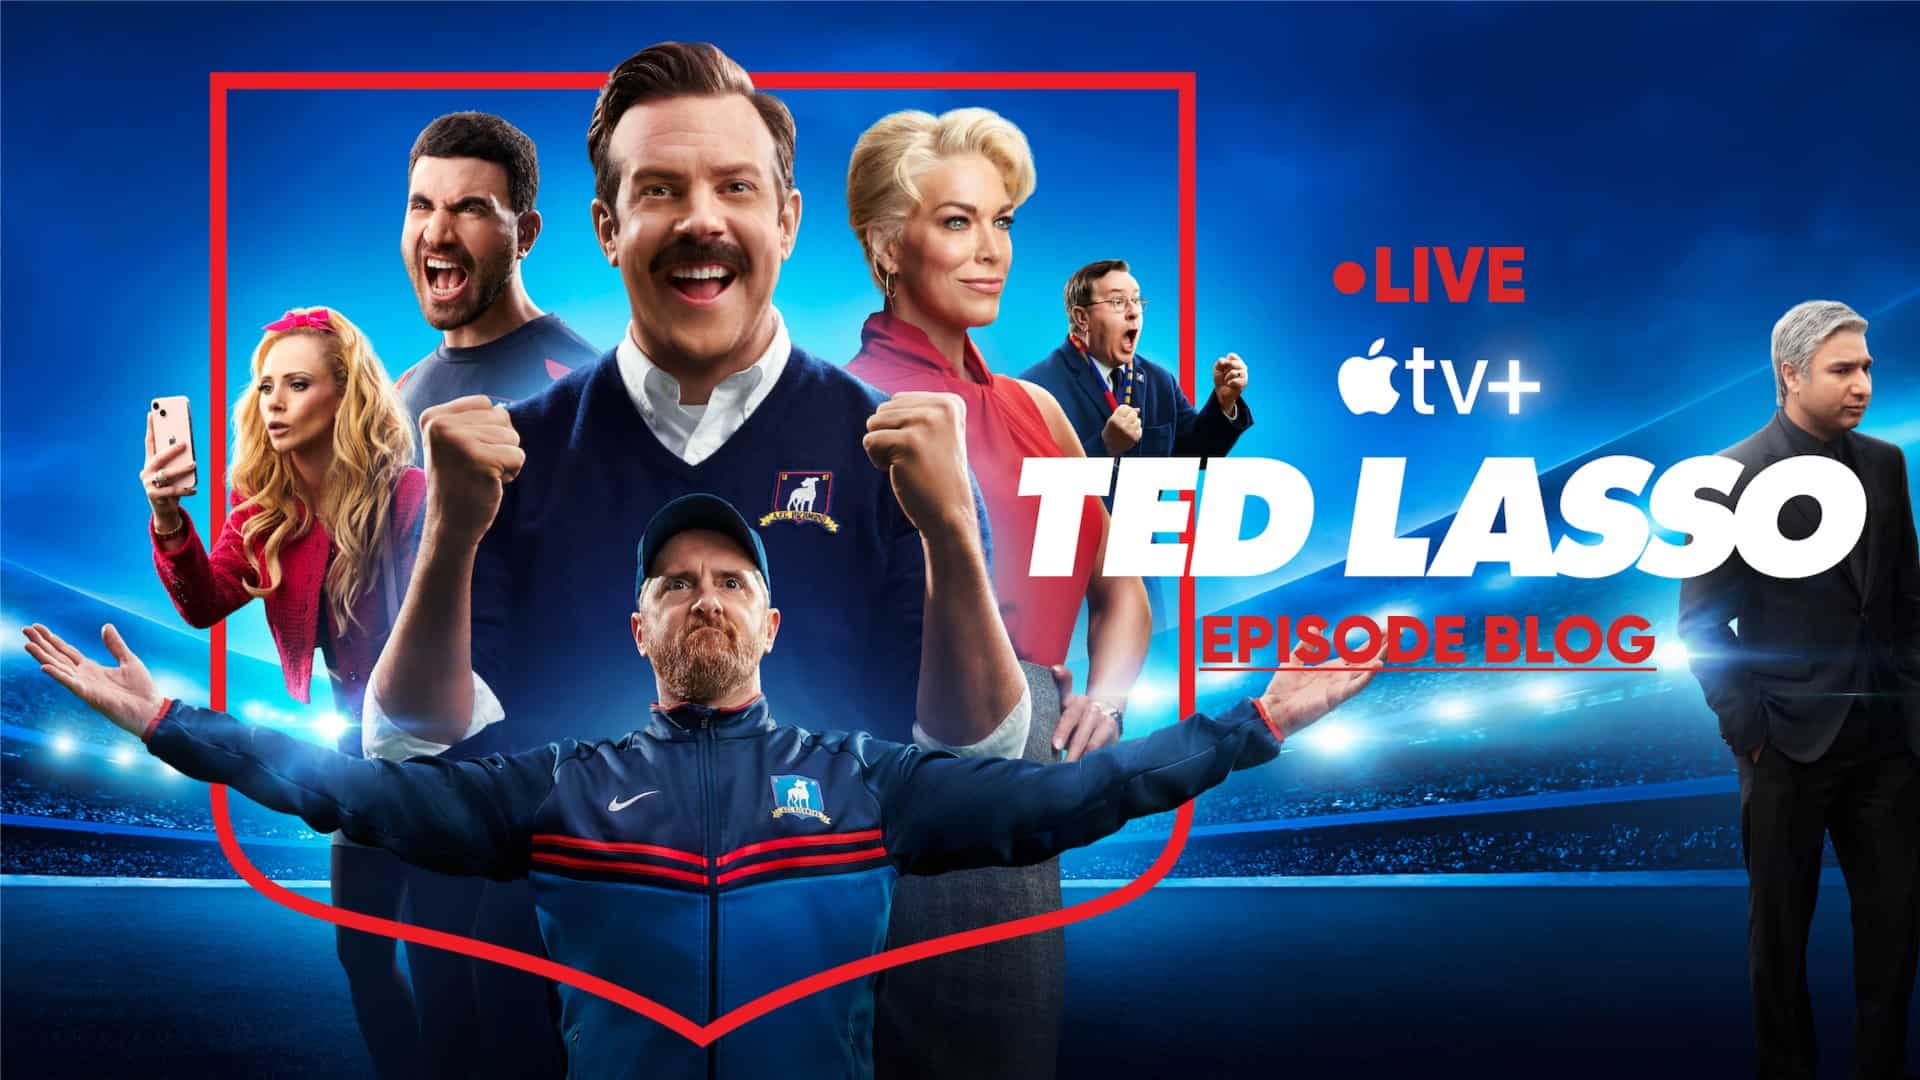 New 'Ted Lasso' teammate Zava is based on what real player?